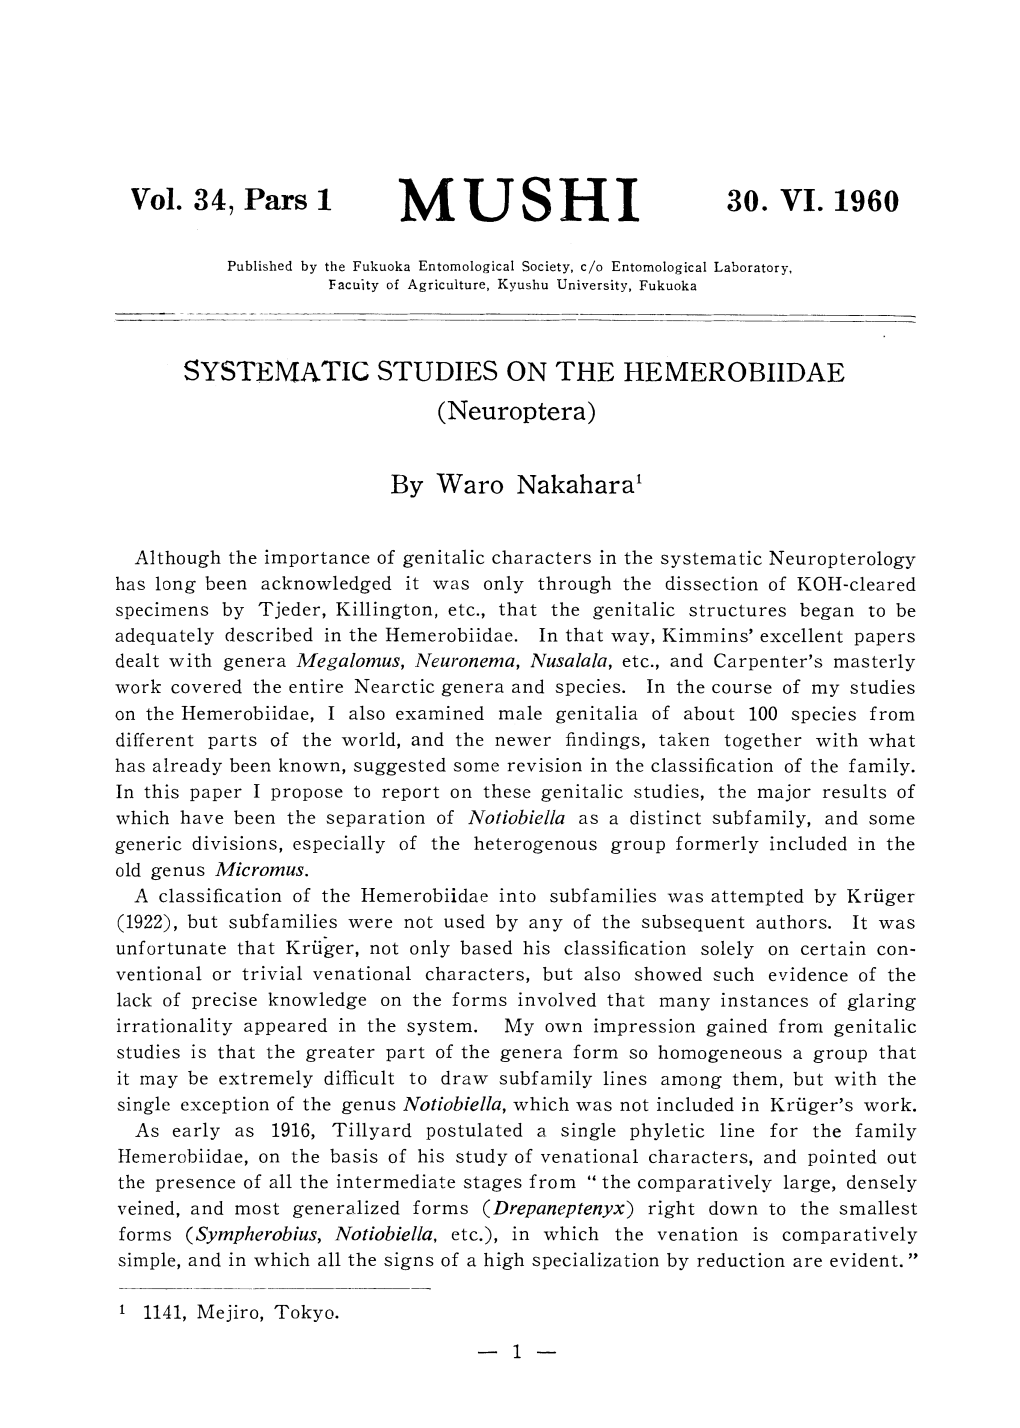 SYSTEMATIC STUDIES on the HEMEROBIIDAE (Neuroptera)